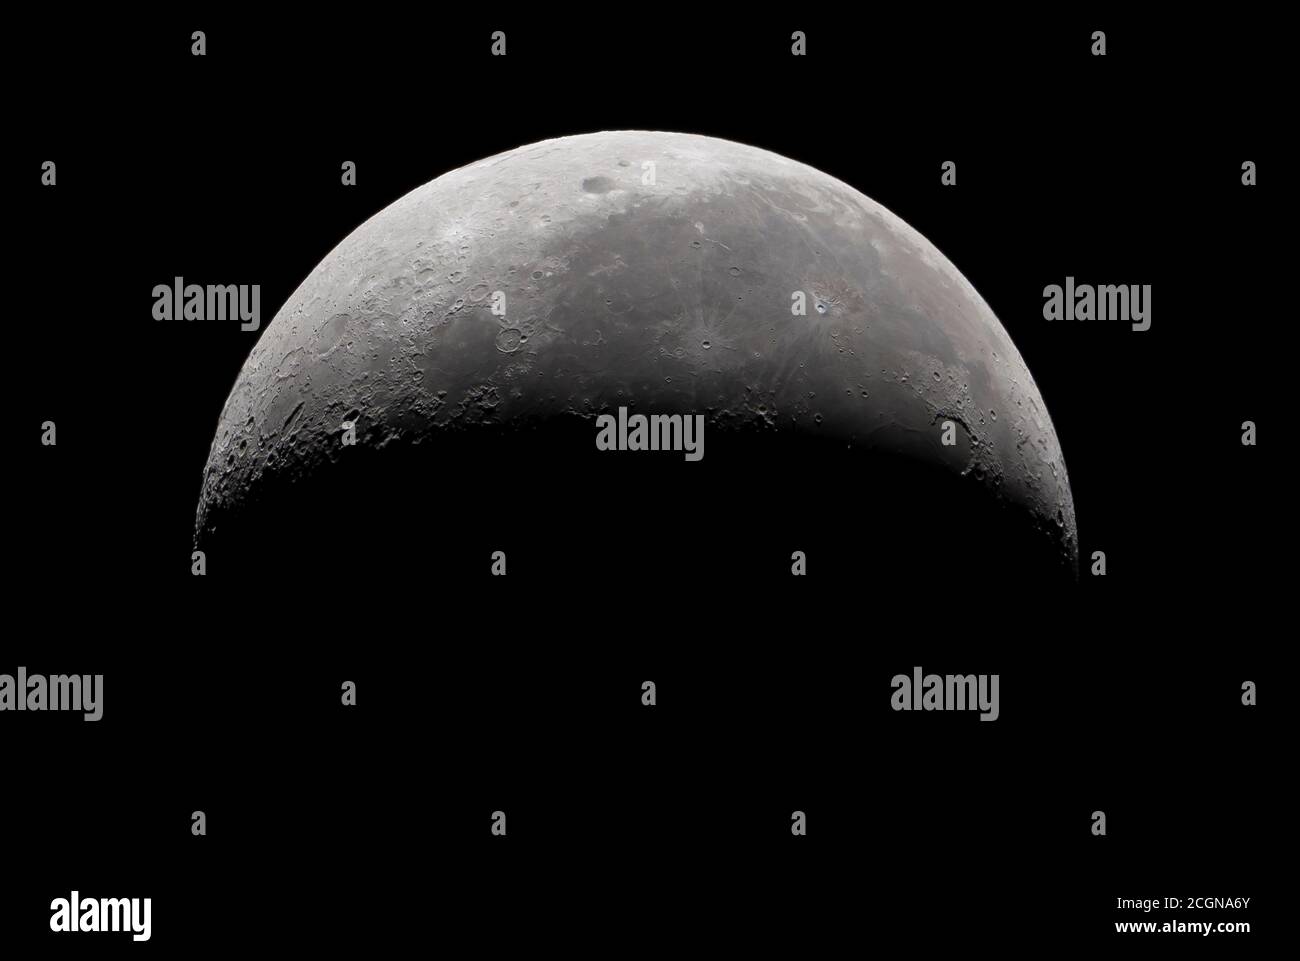 London, UK. 12 September 2020. 39% illuminated waning crescent Moon, photographed in the early hours of 12th September with western limb facing to top. Credit: Malcolm Park/Alamy Live News. Stock Photo